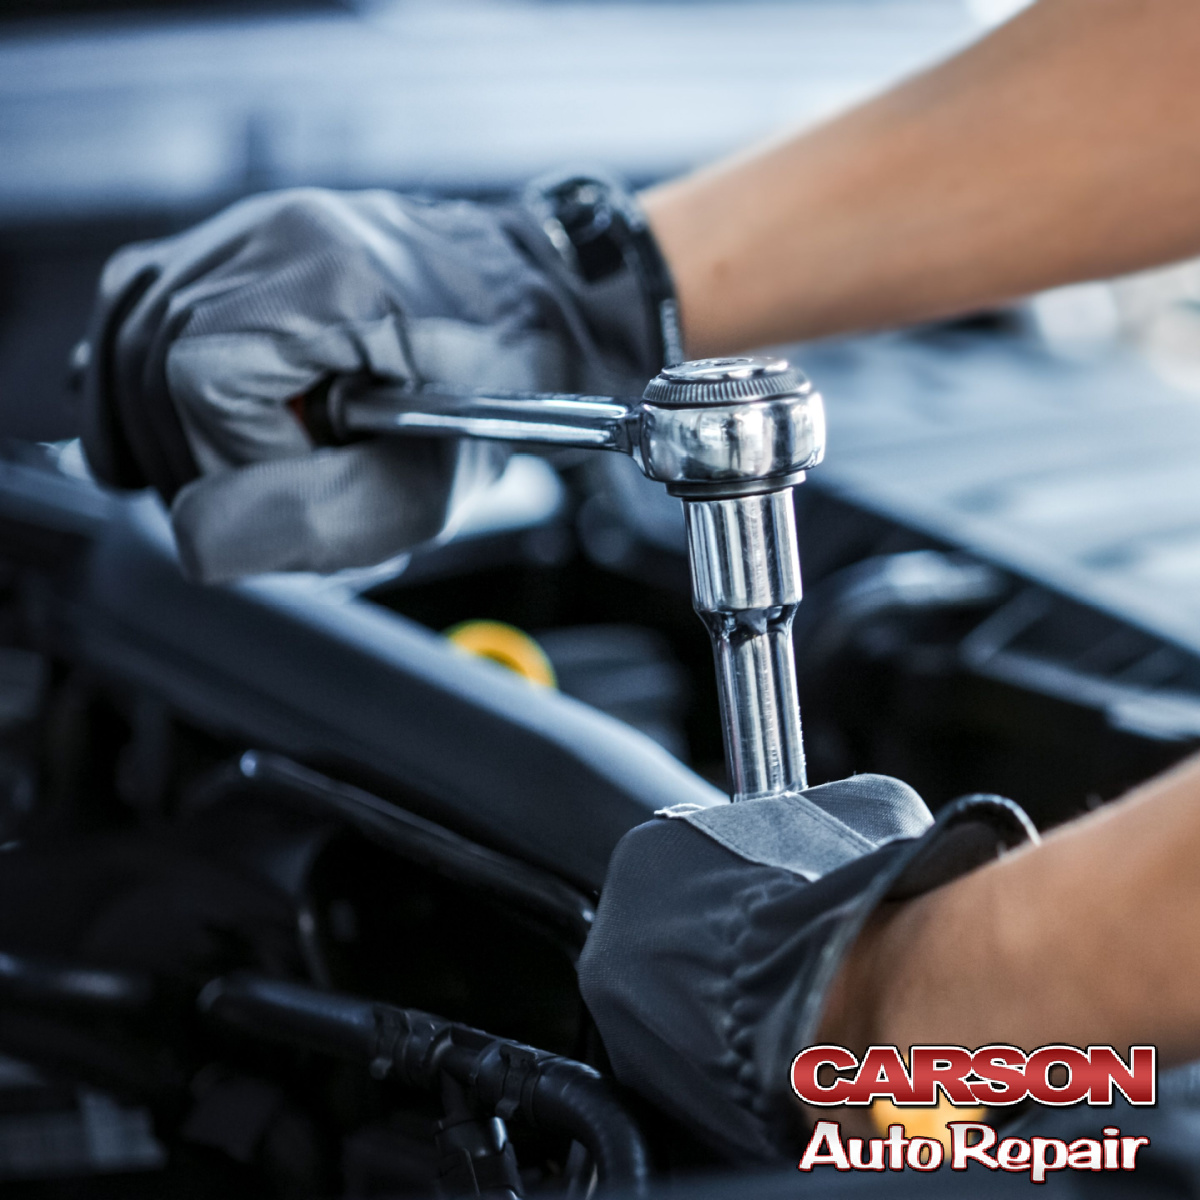 Keep Your Wheels on the Ground with Our Essential Everyday Auto Repair Services